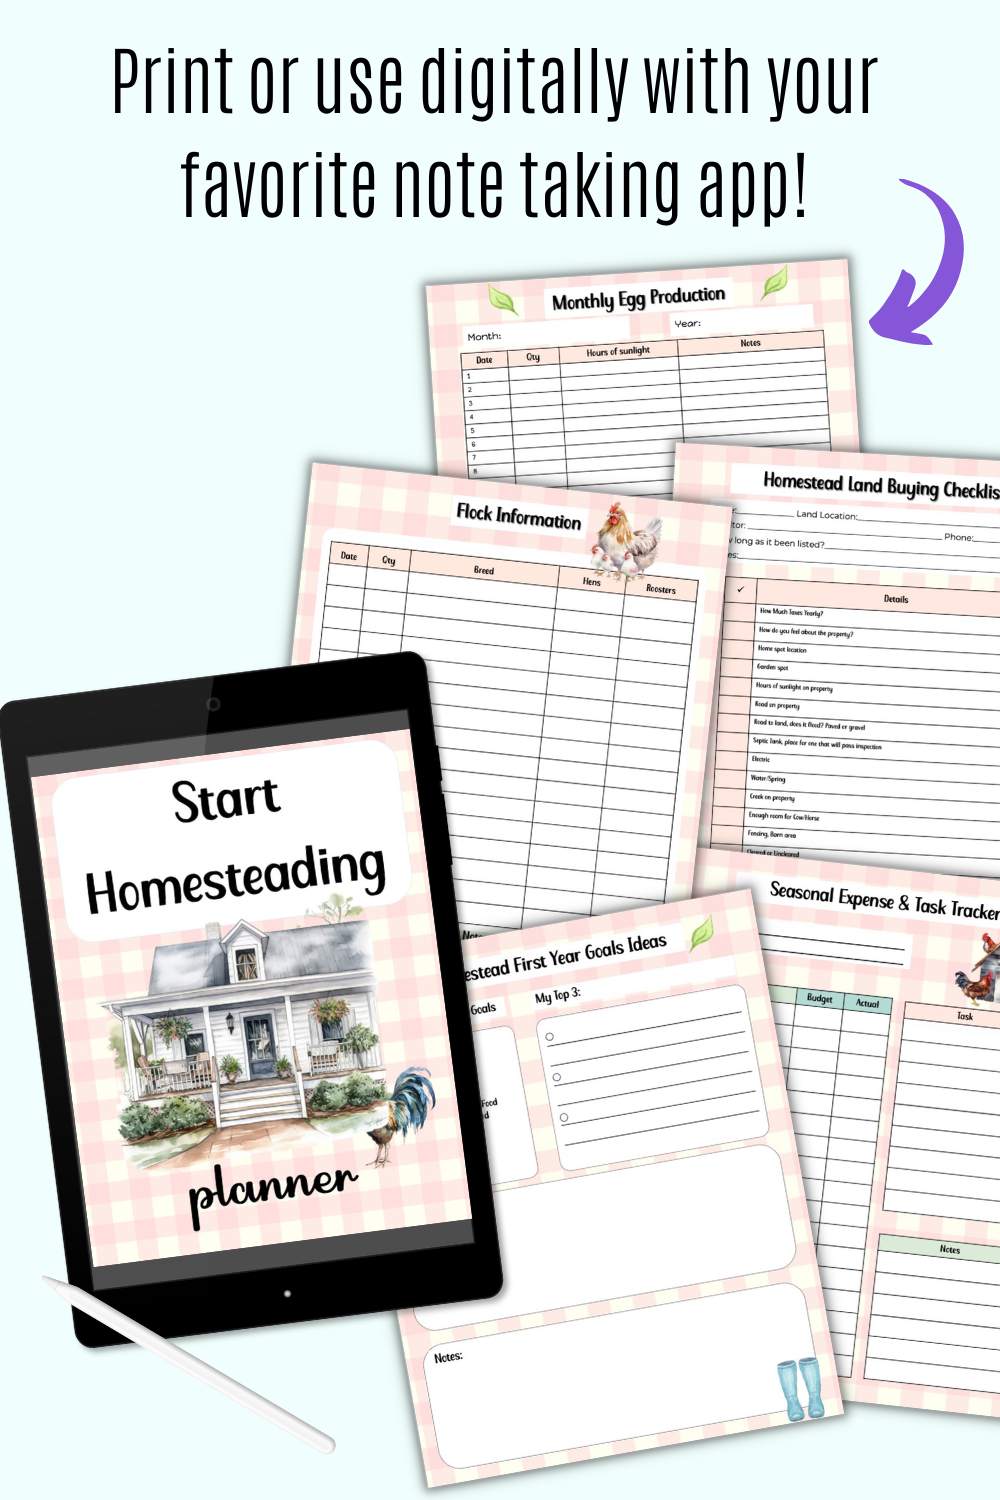 A mockup of using a homesteading planner on a tablet